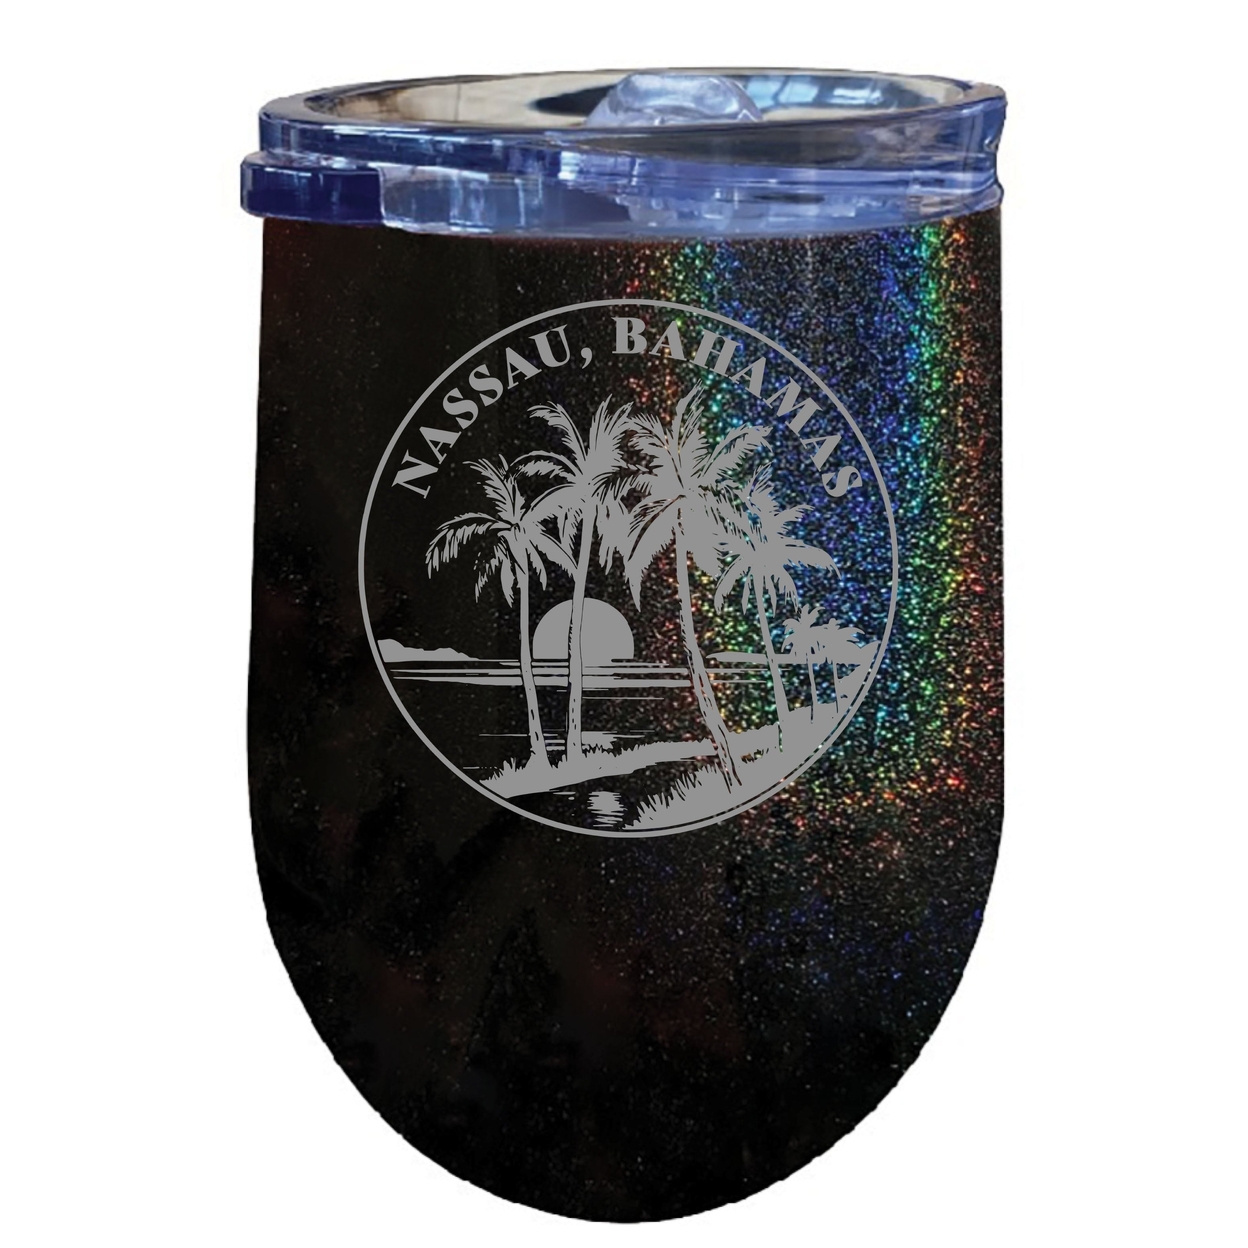 Nassau The Bahamas Souvenir 12 Oz Engraved Insulated Wine Stainless Steel Tumbler - Coral,,2-Pack